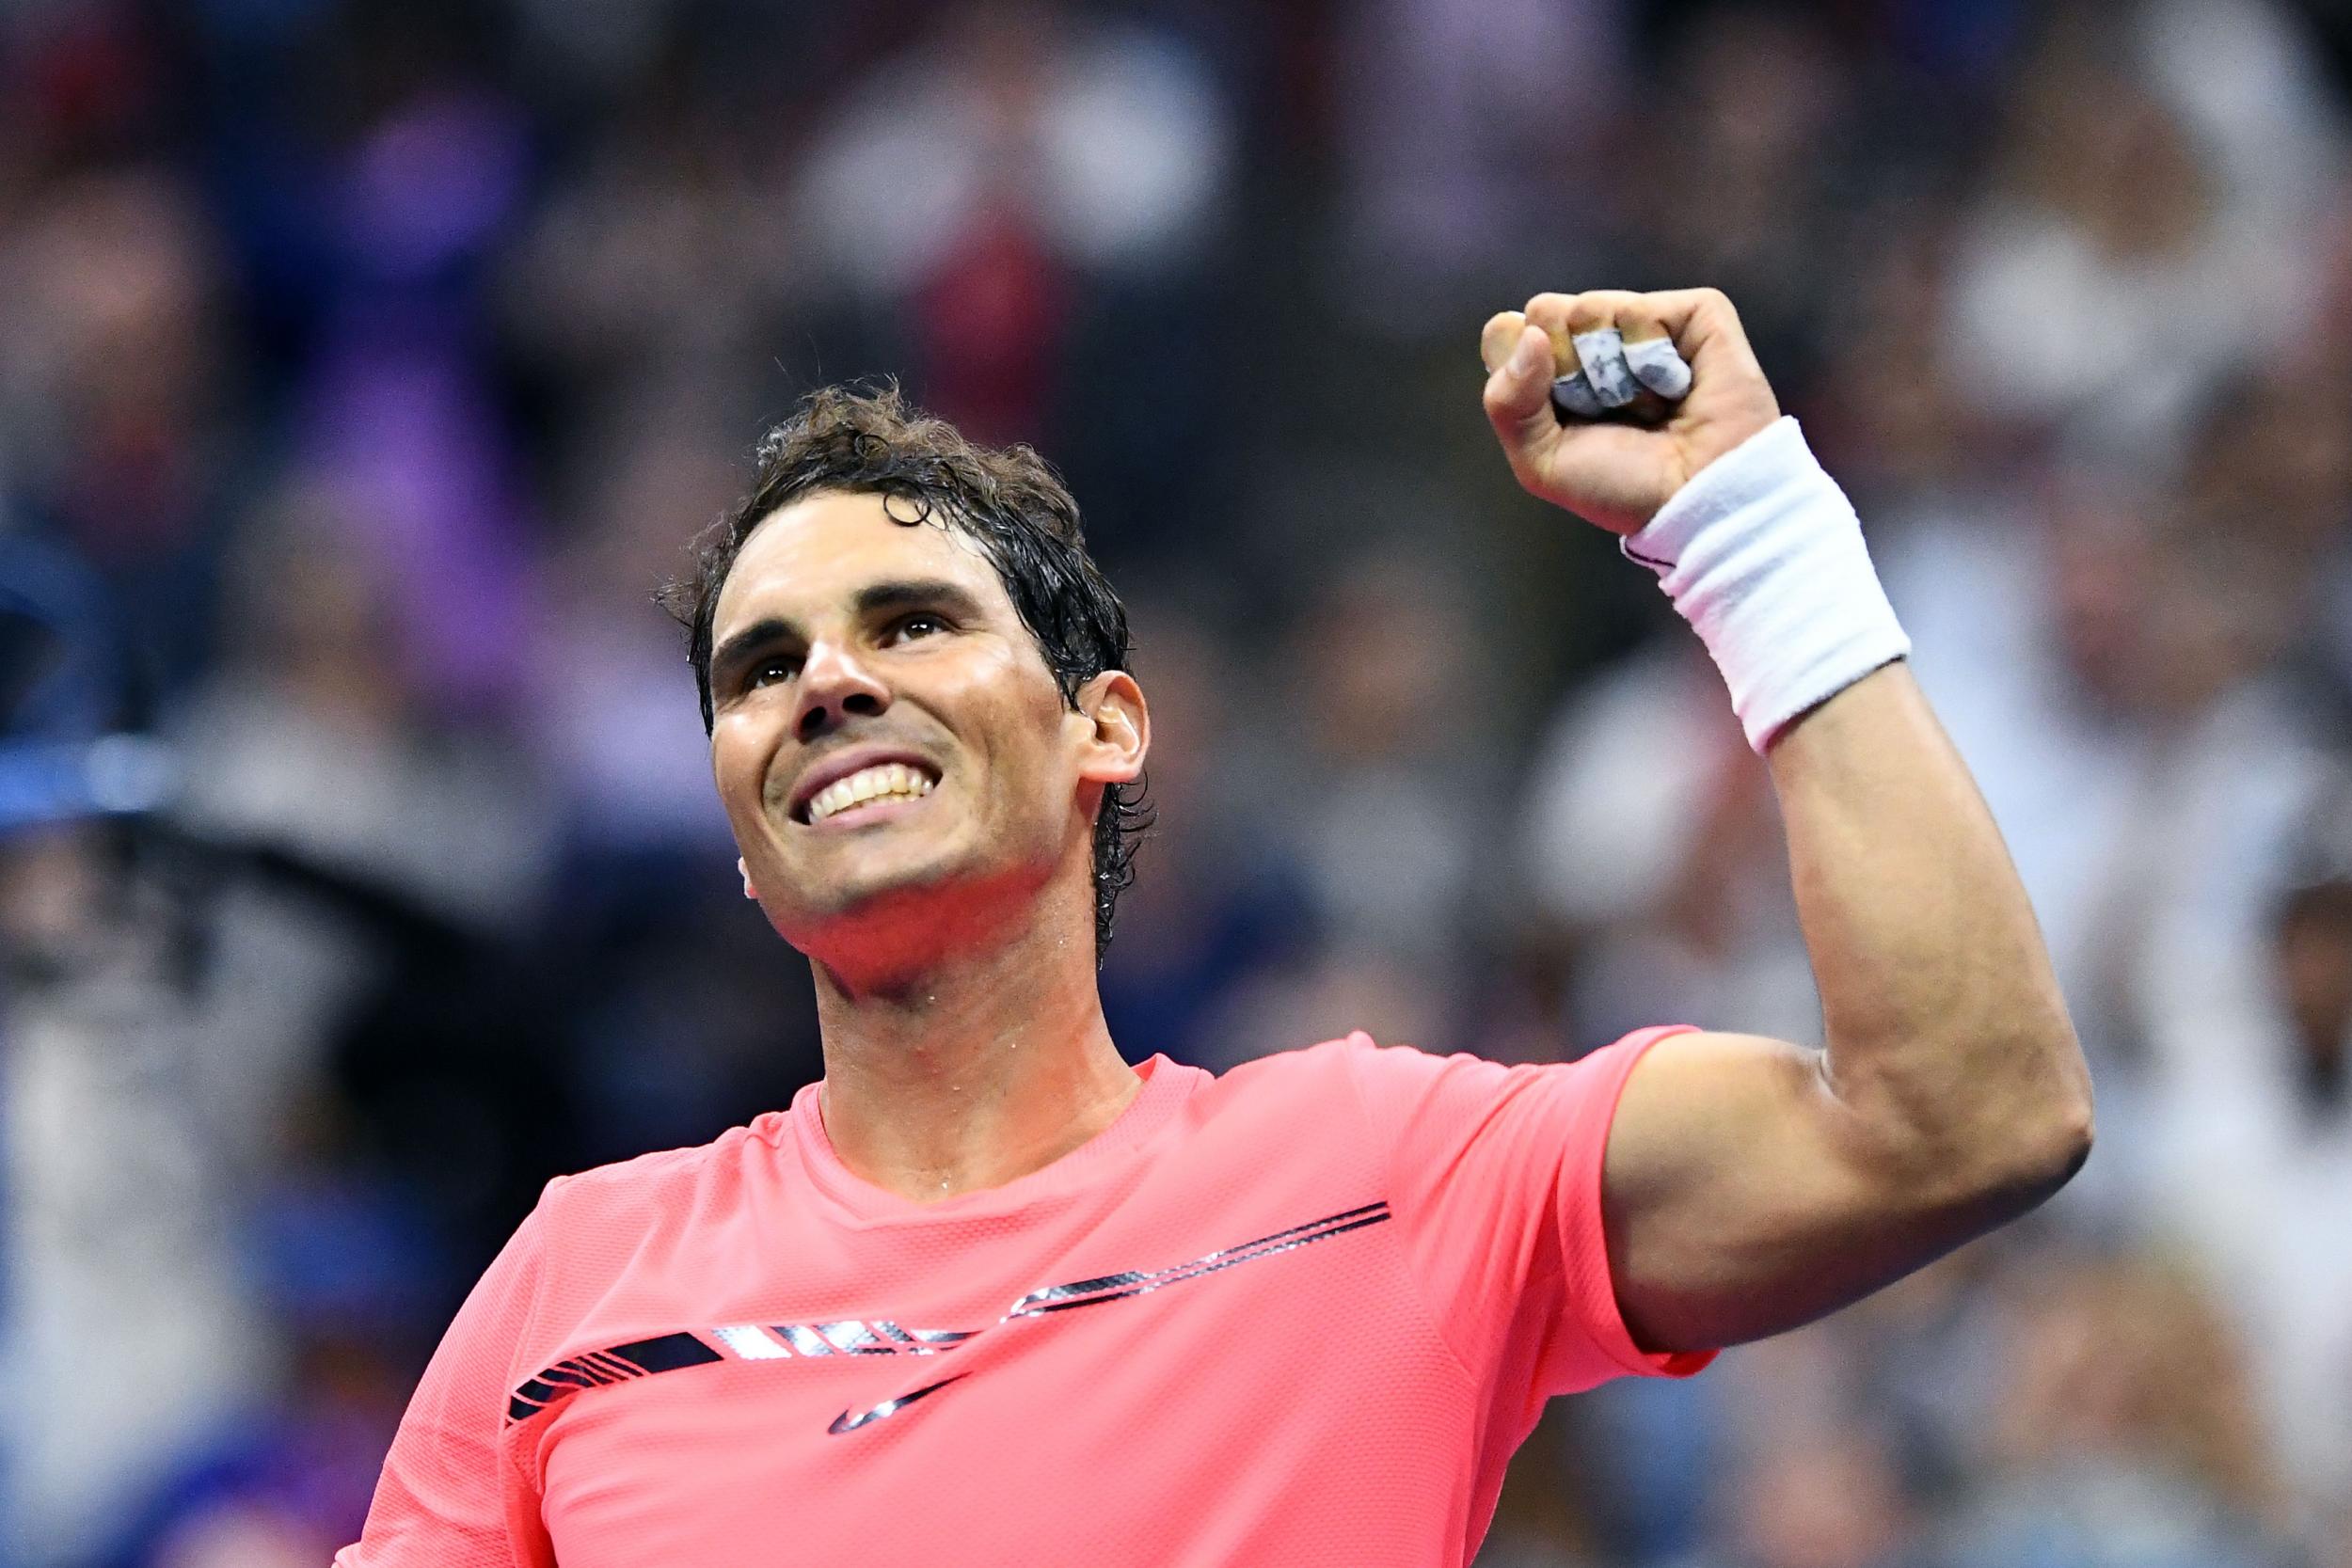 Rafa Nadal celebrates after securing his place in the semi-finals